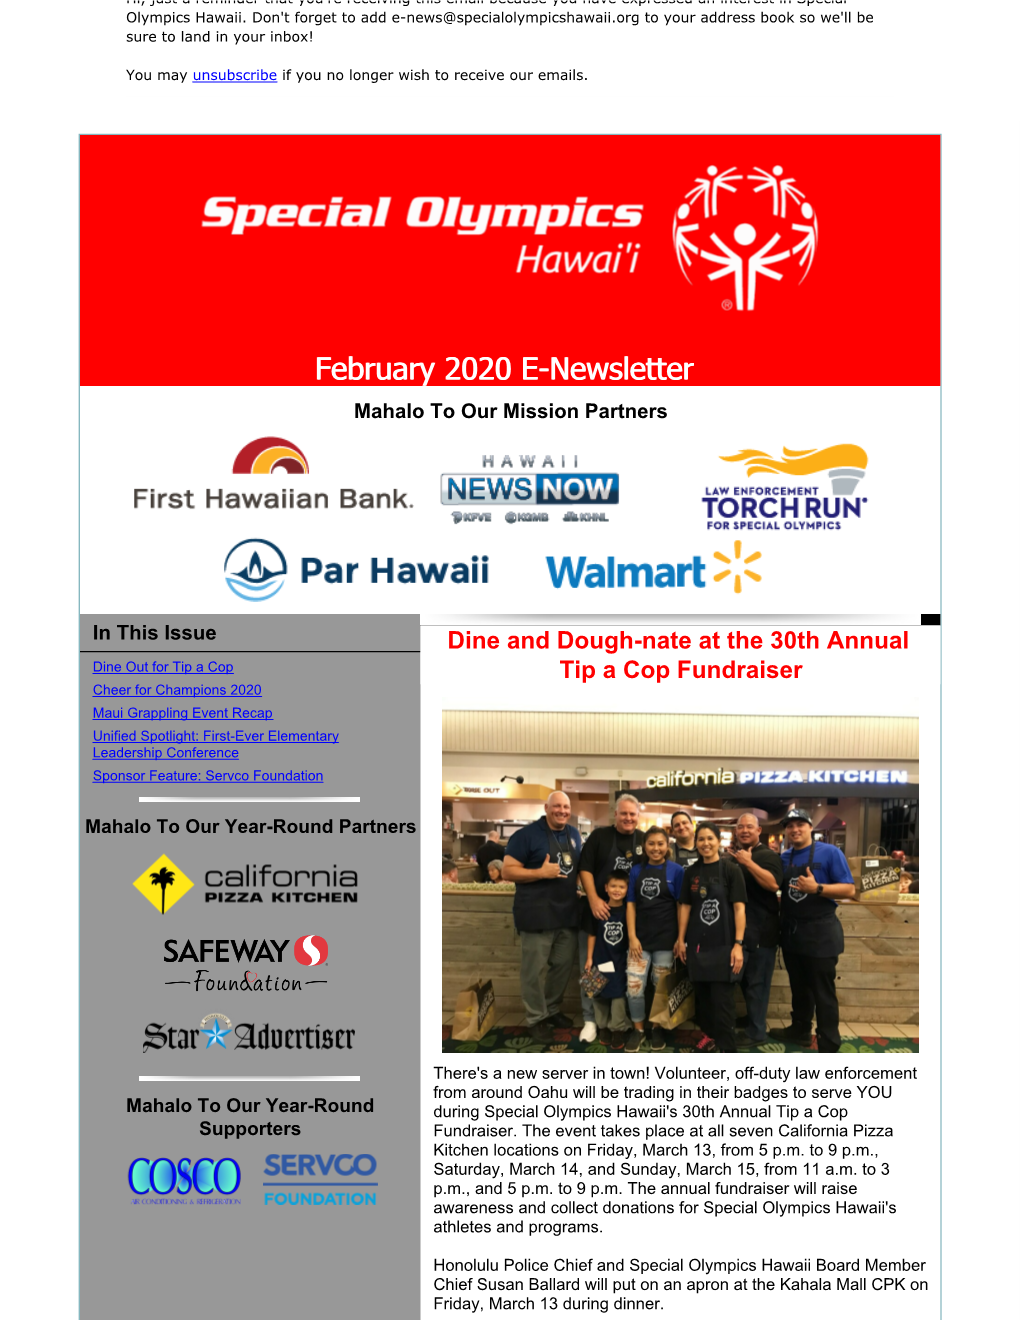 February 2020 E-Newsletter Mahalo to Our Mission Partners